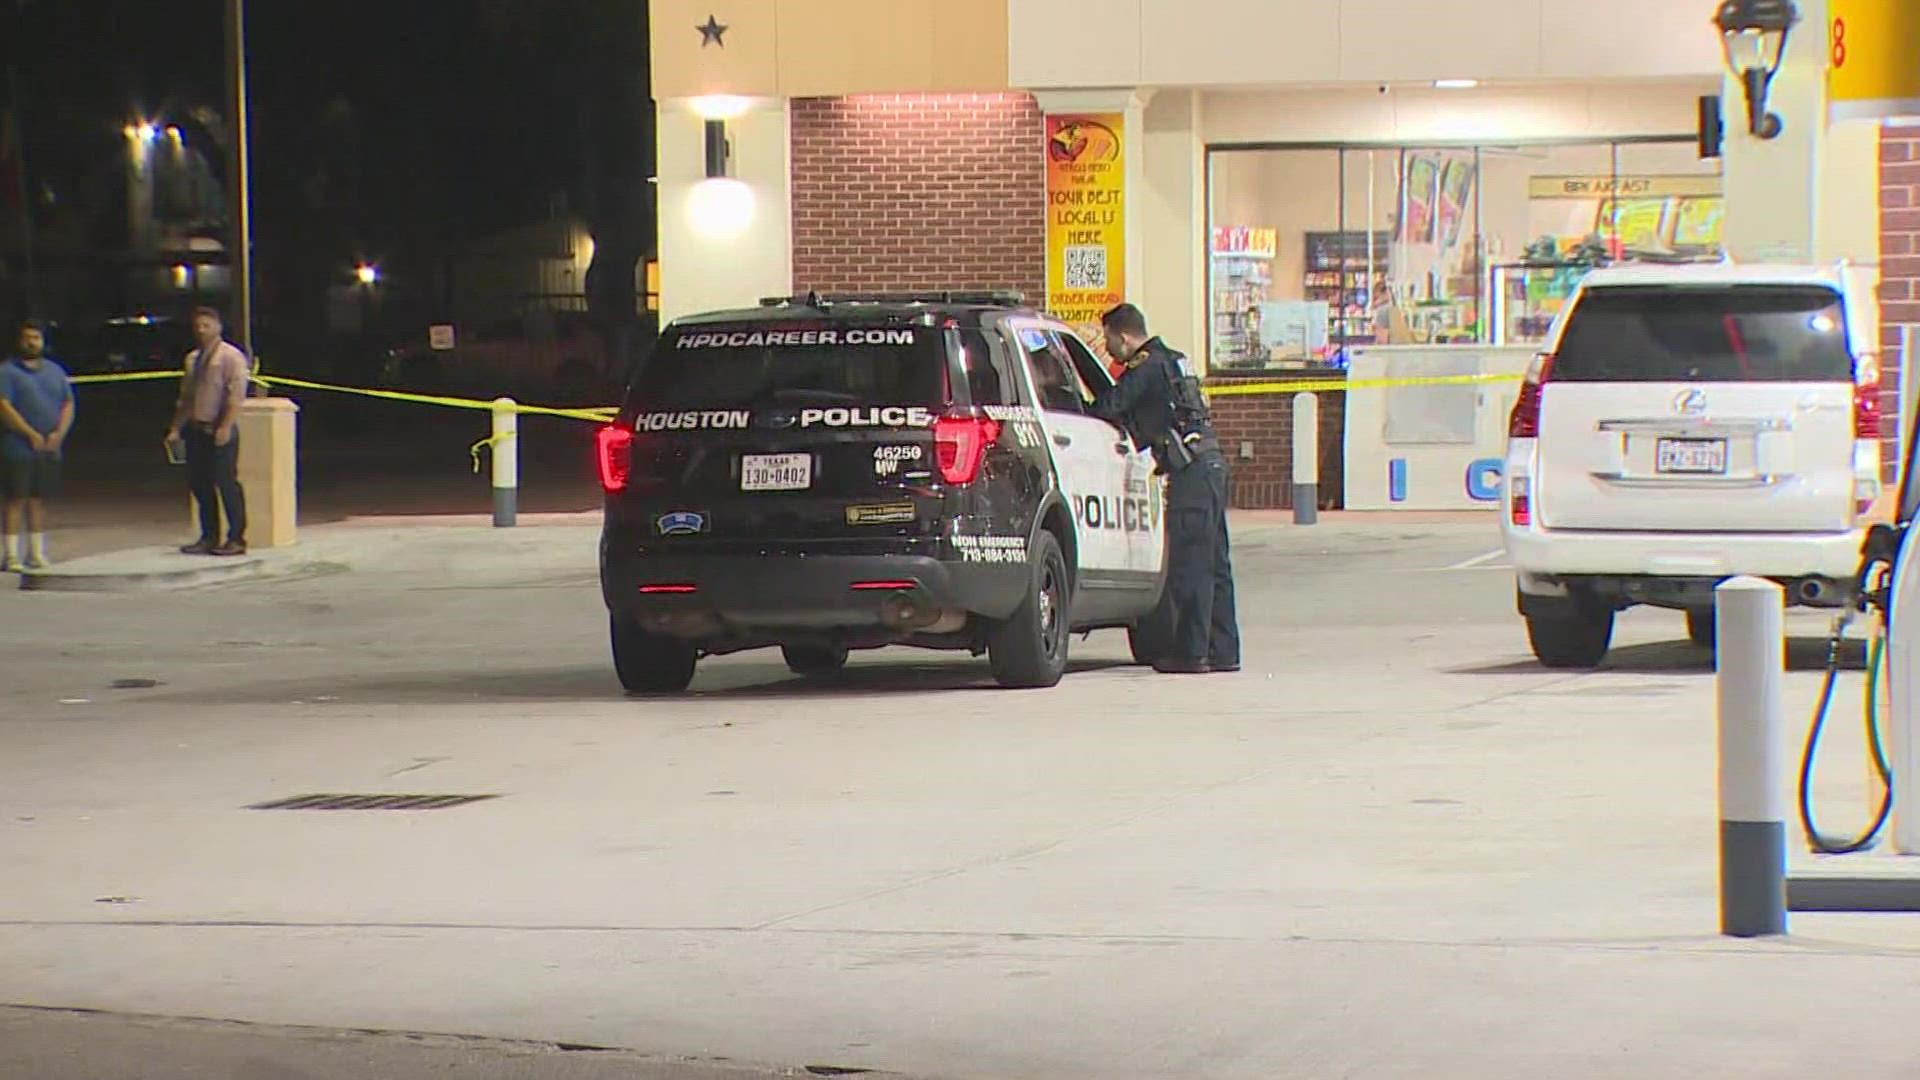 Houston security guard had several encounters with man prior to deadly shooting